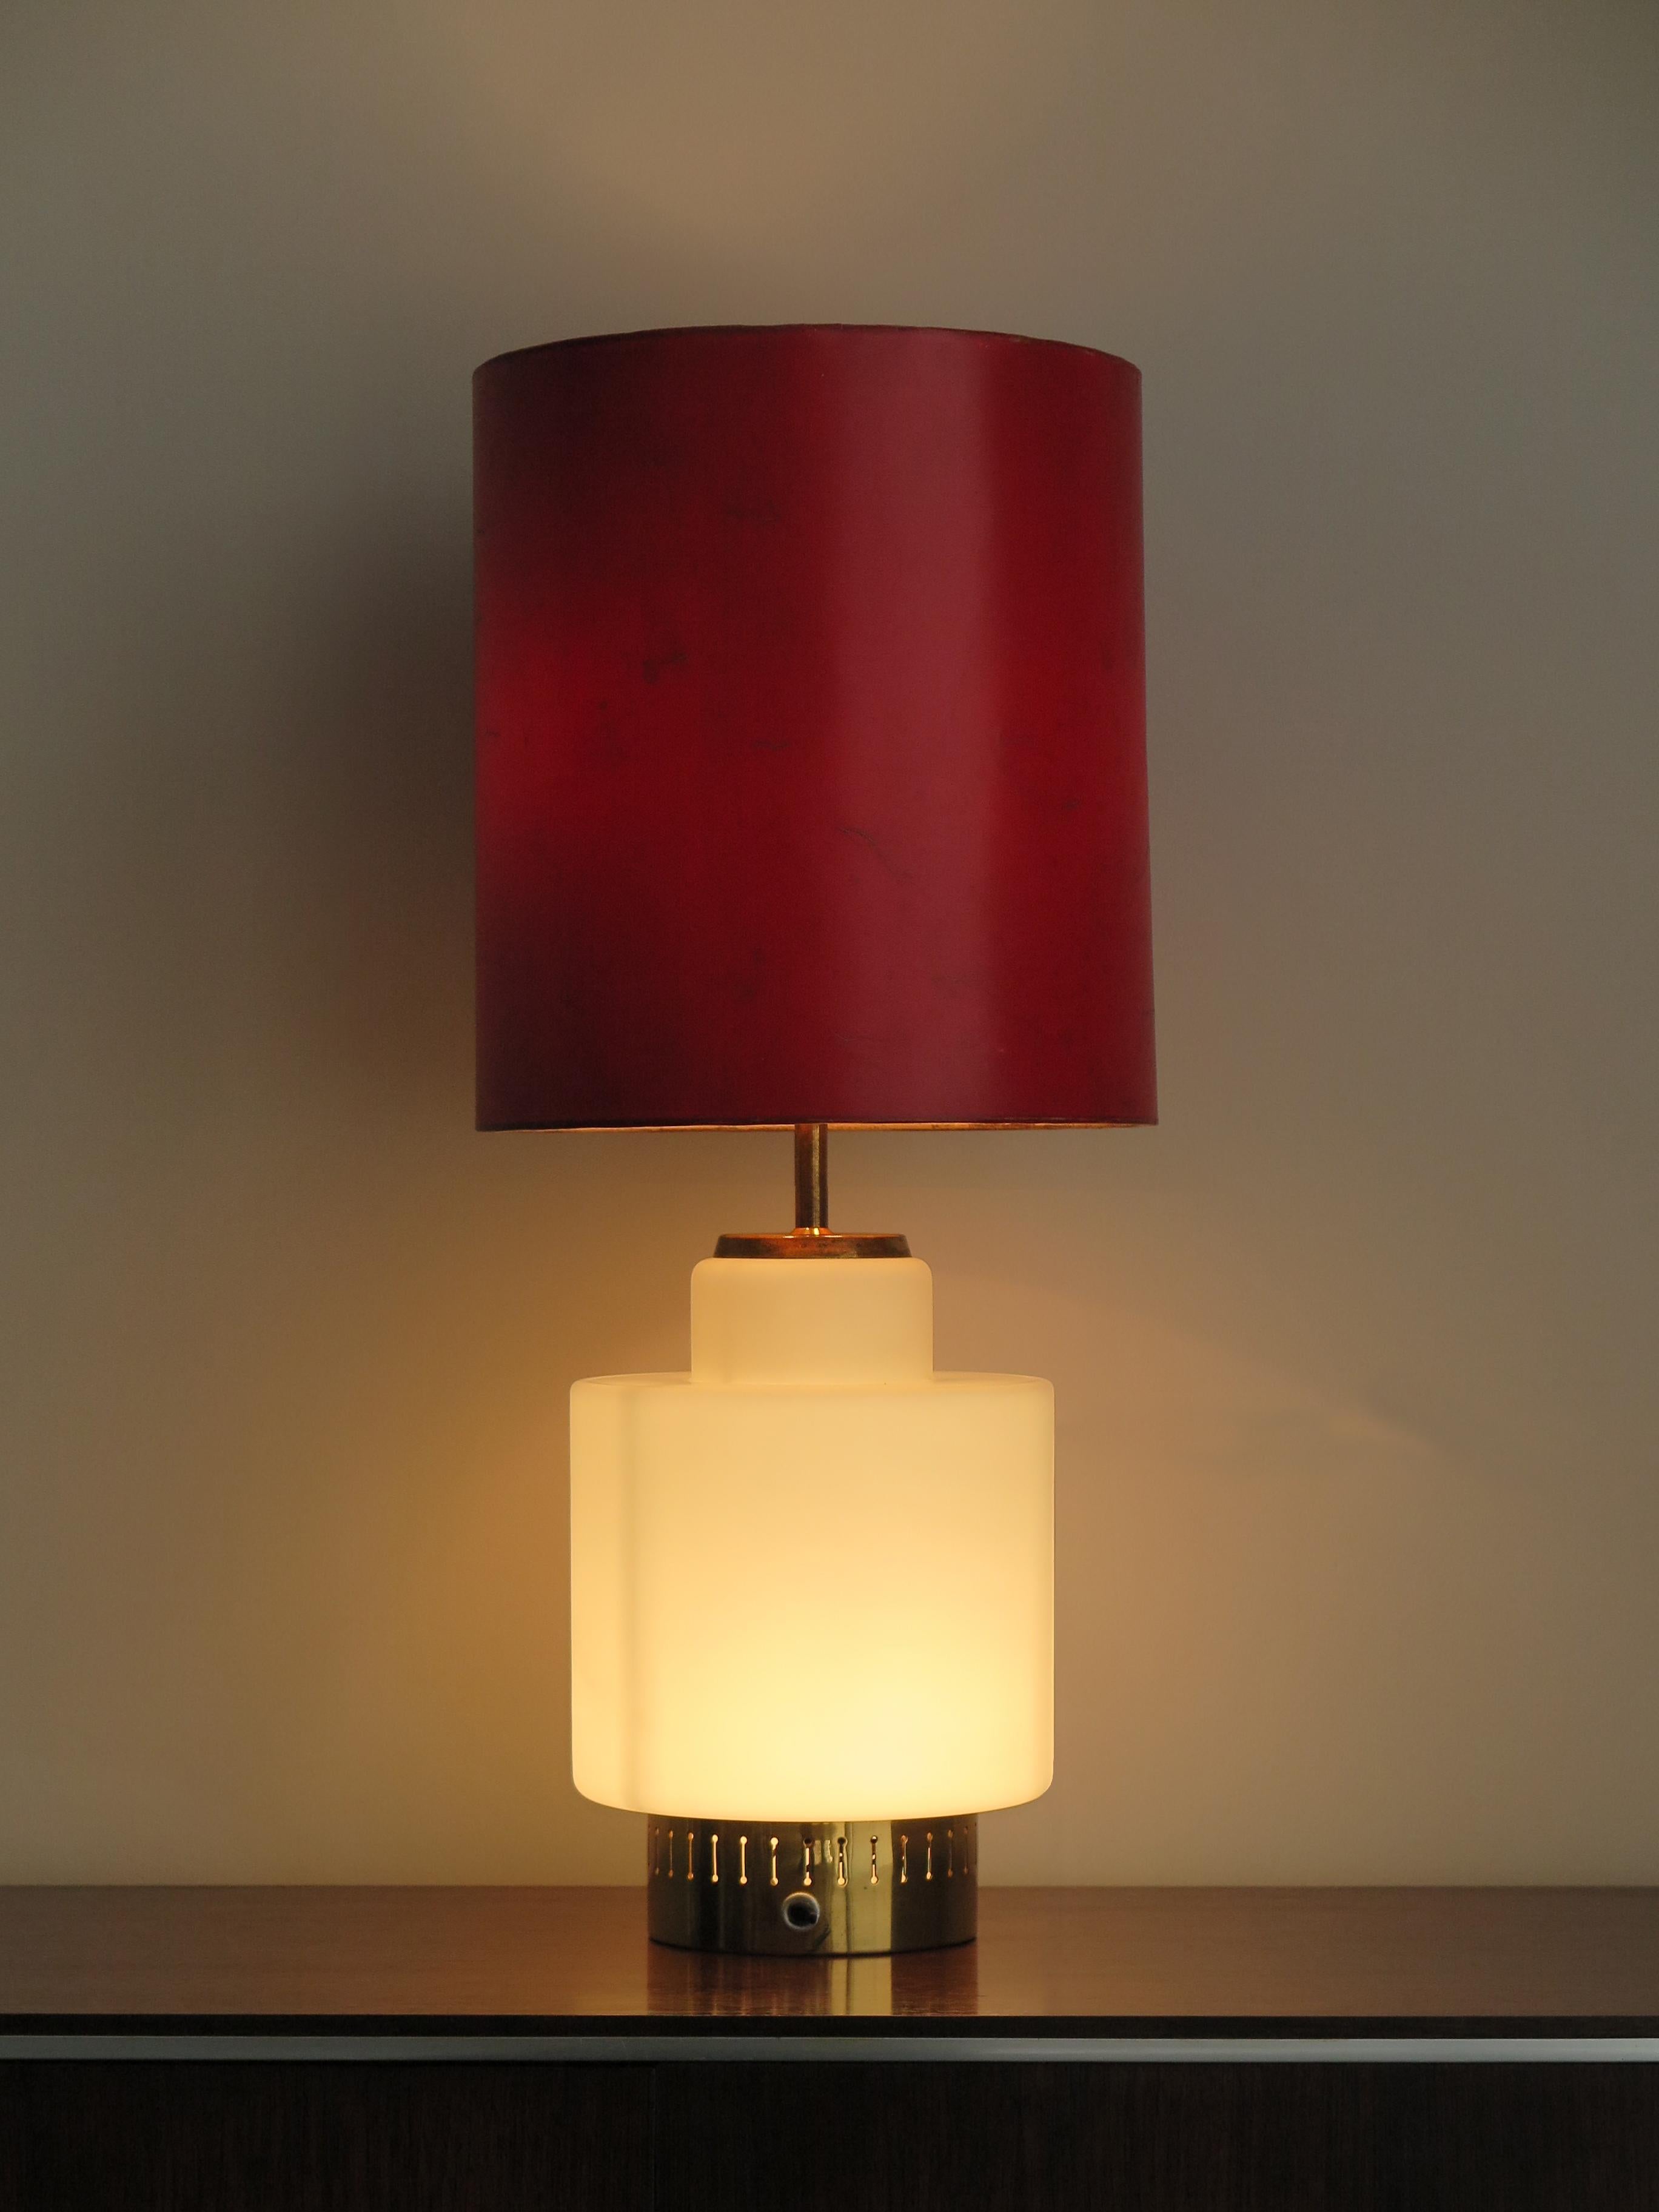 Italian table lamp with triple ignition, “8055” model, produced by Stilnovo with brass structure, frosted opaline glass base and with red paper shade, original manufacture label, circa 1950s.

Please note that the lamp is original of the period